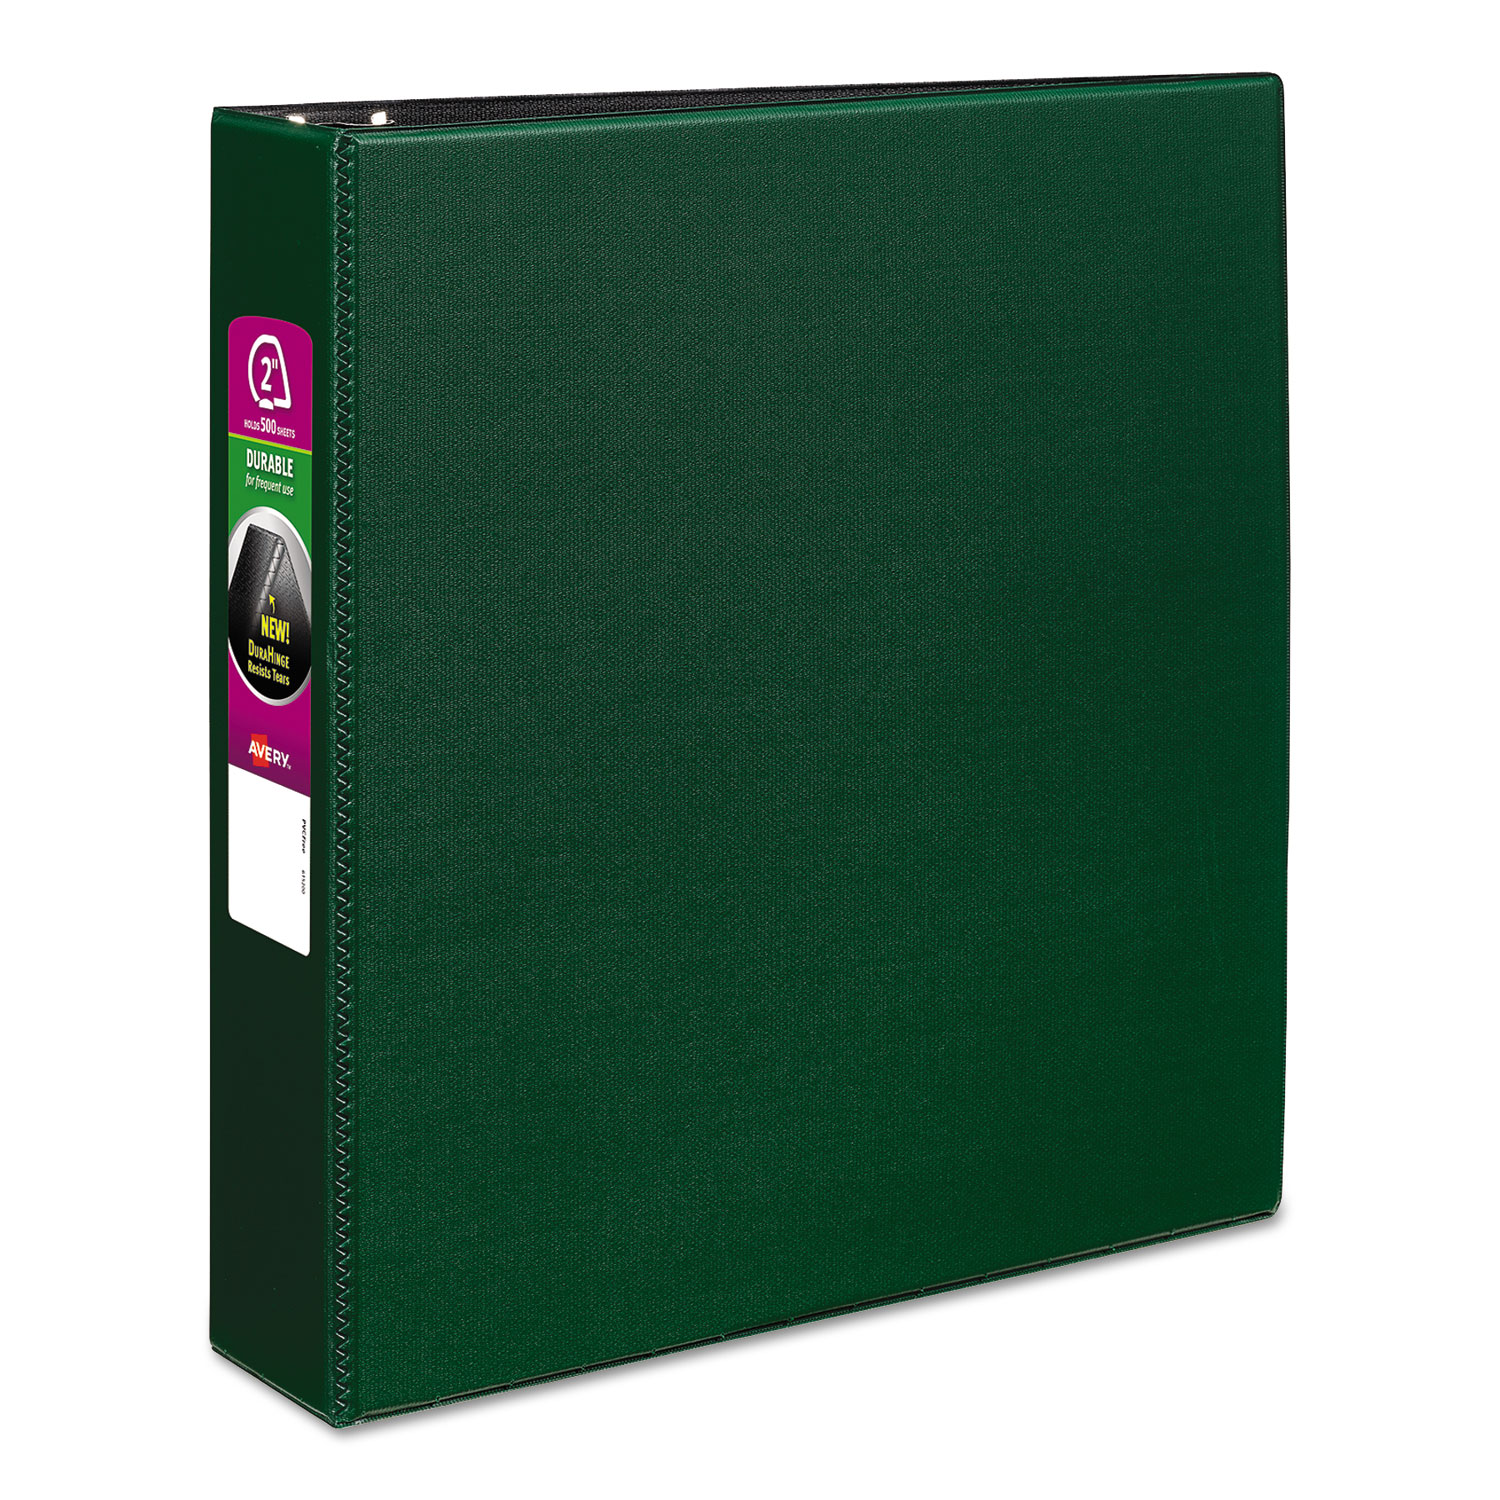  Avery 27553 Durable Non-View Binder with DuraHinge and Slant Rings, 3 Rings, 2 Capacity, 11 x 8.5, Green (AVE27553) 